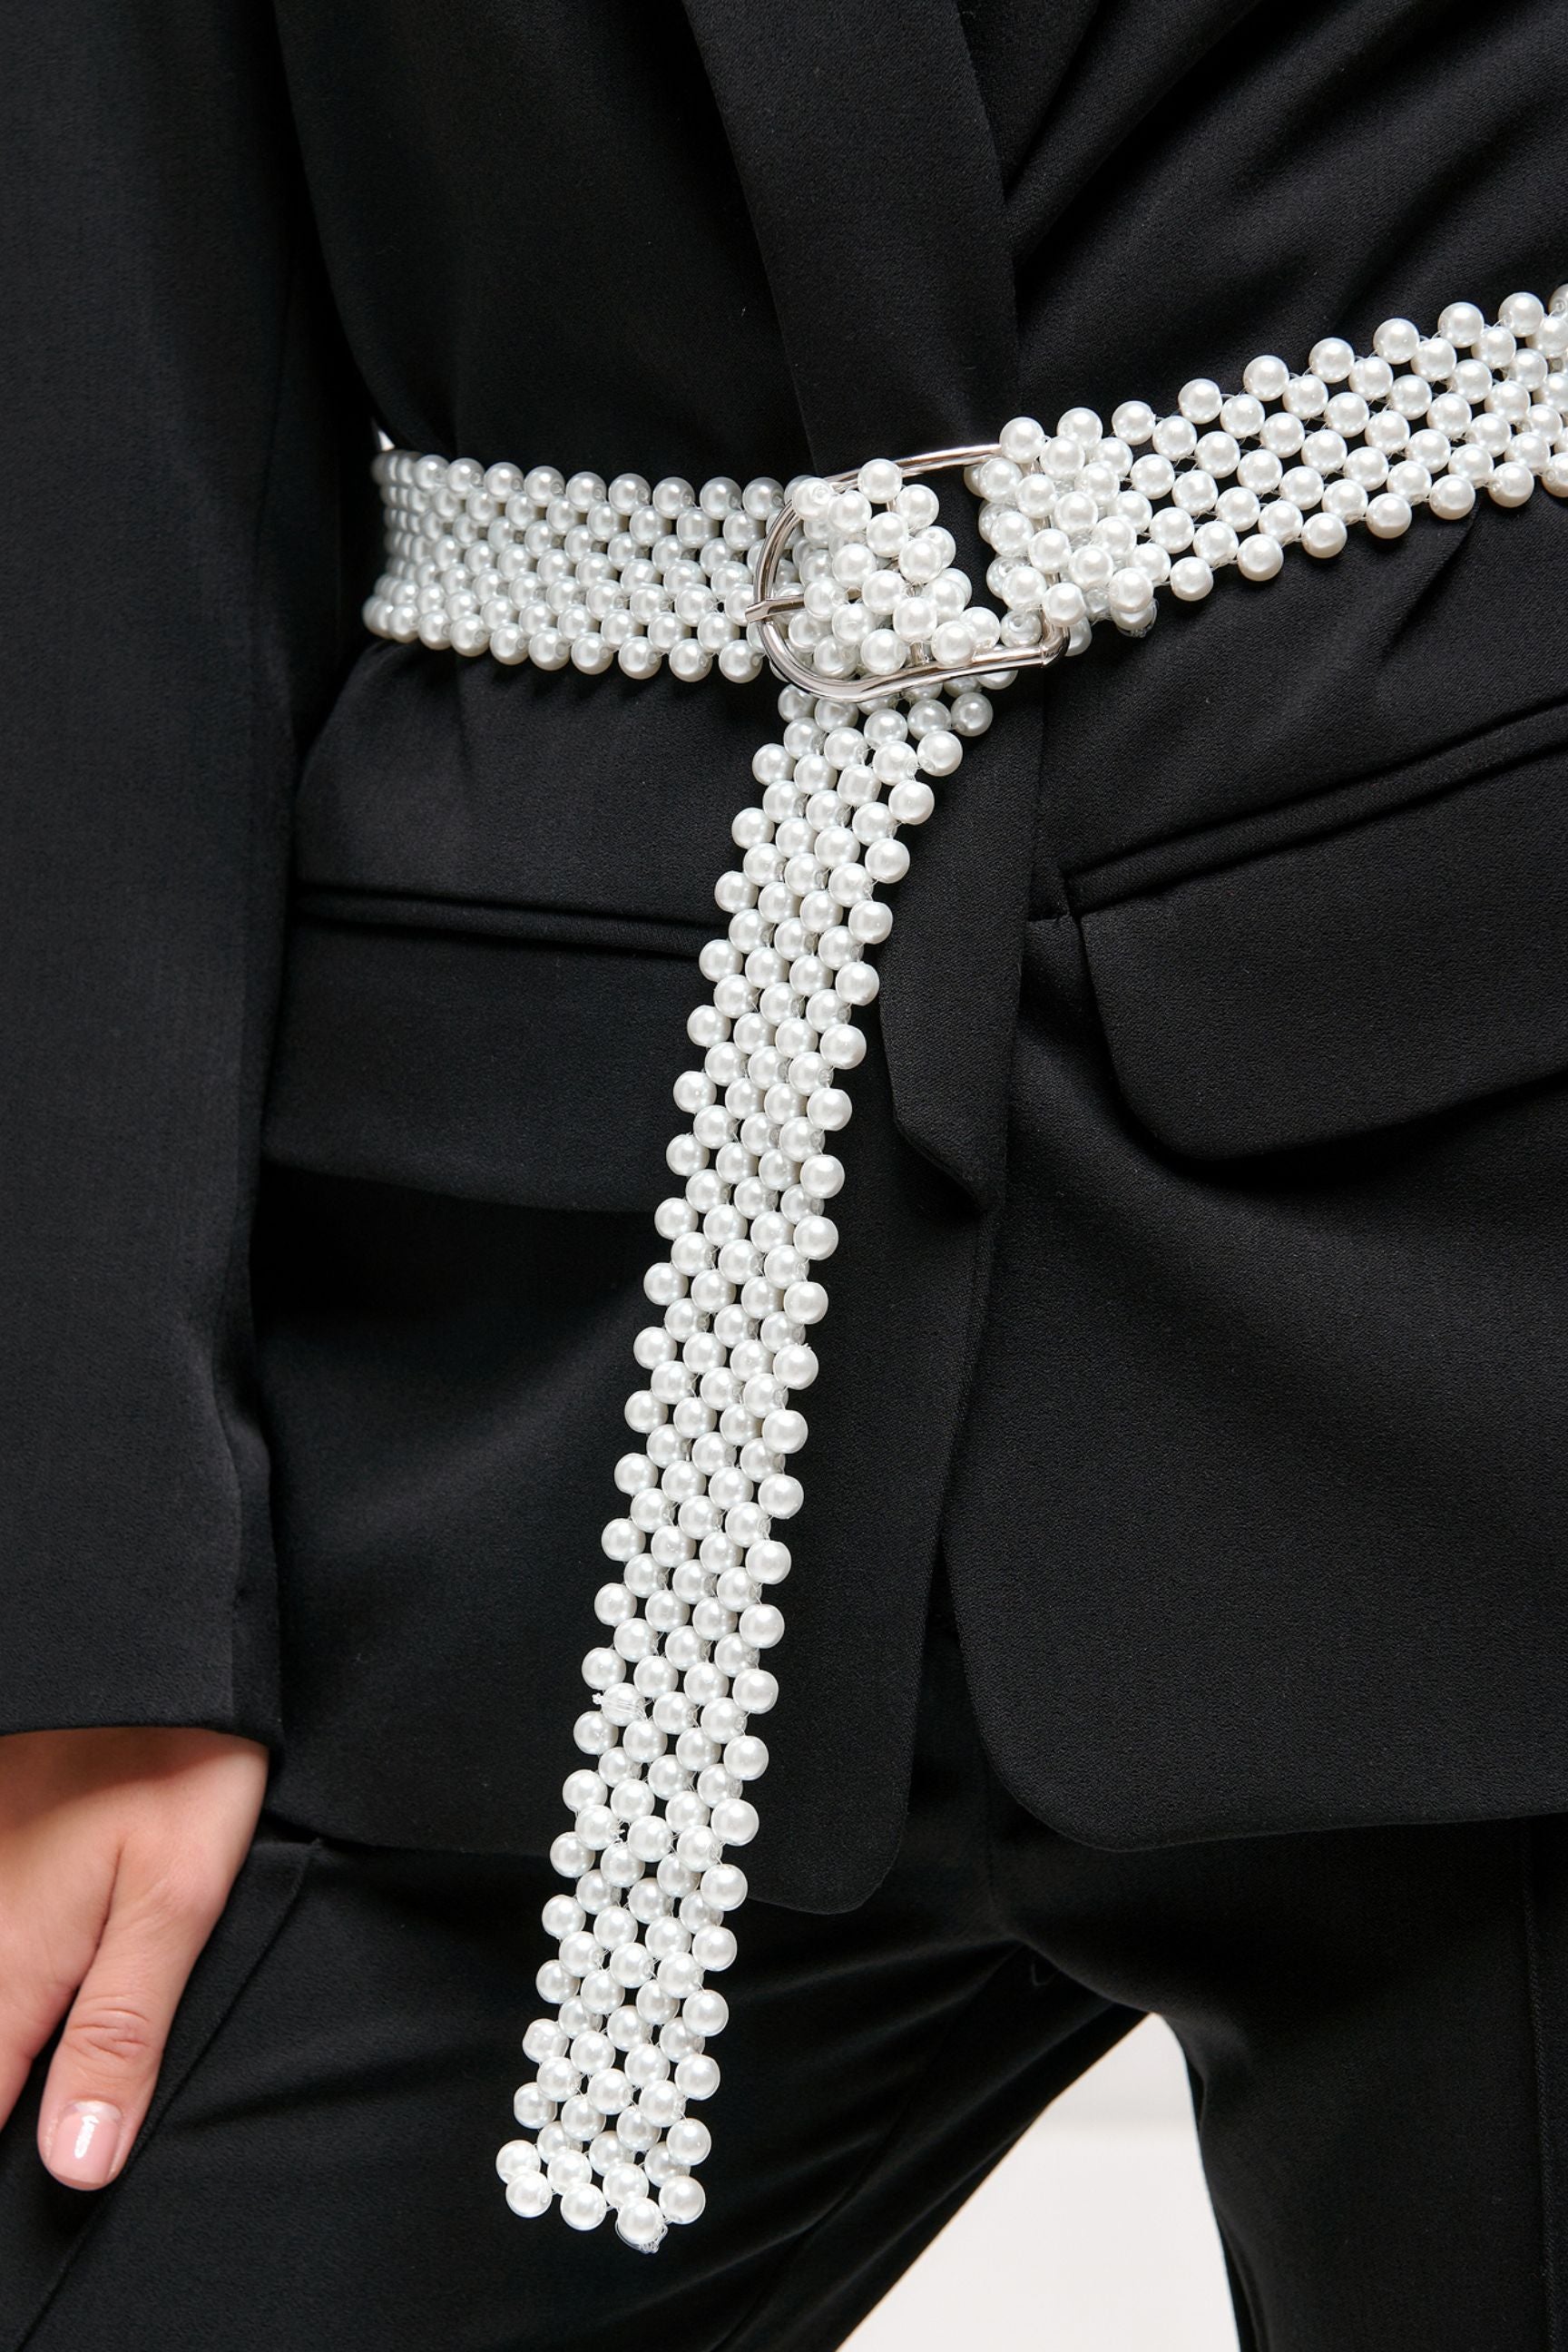 Beaded Belt for Women with Swarovski Pearl Beads and Metal Buckle Belt